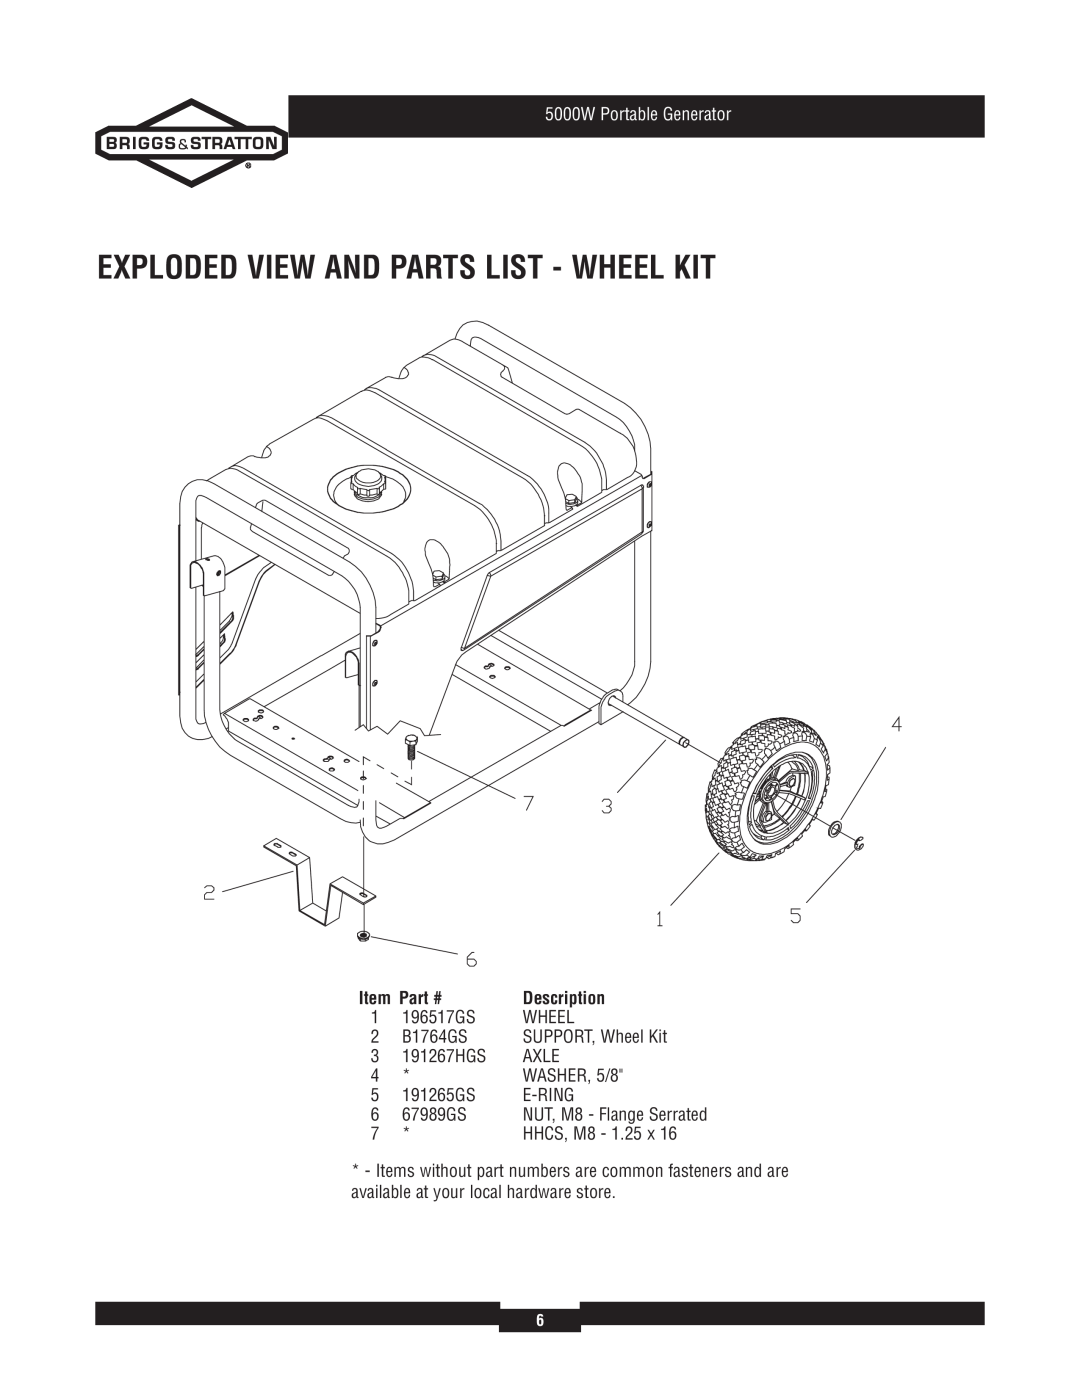 Briggs & Stratton 30361 manual Exploded View And Parts List - Wheel Kit, 5000W Portable Generator, Description 